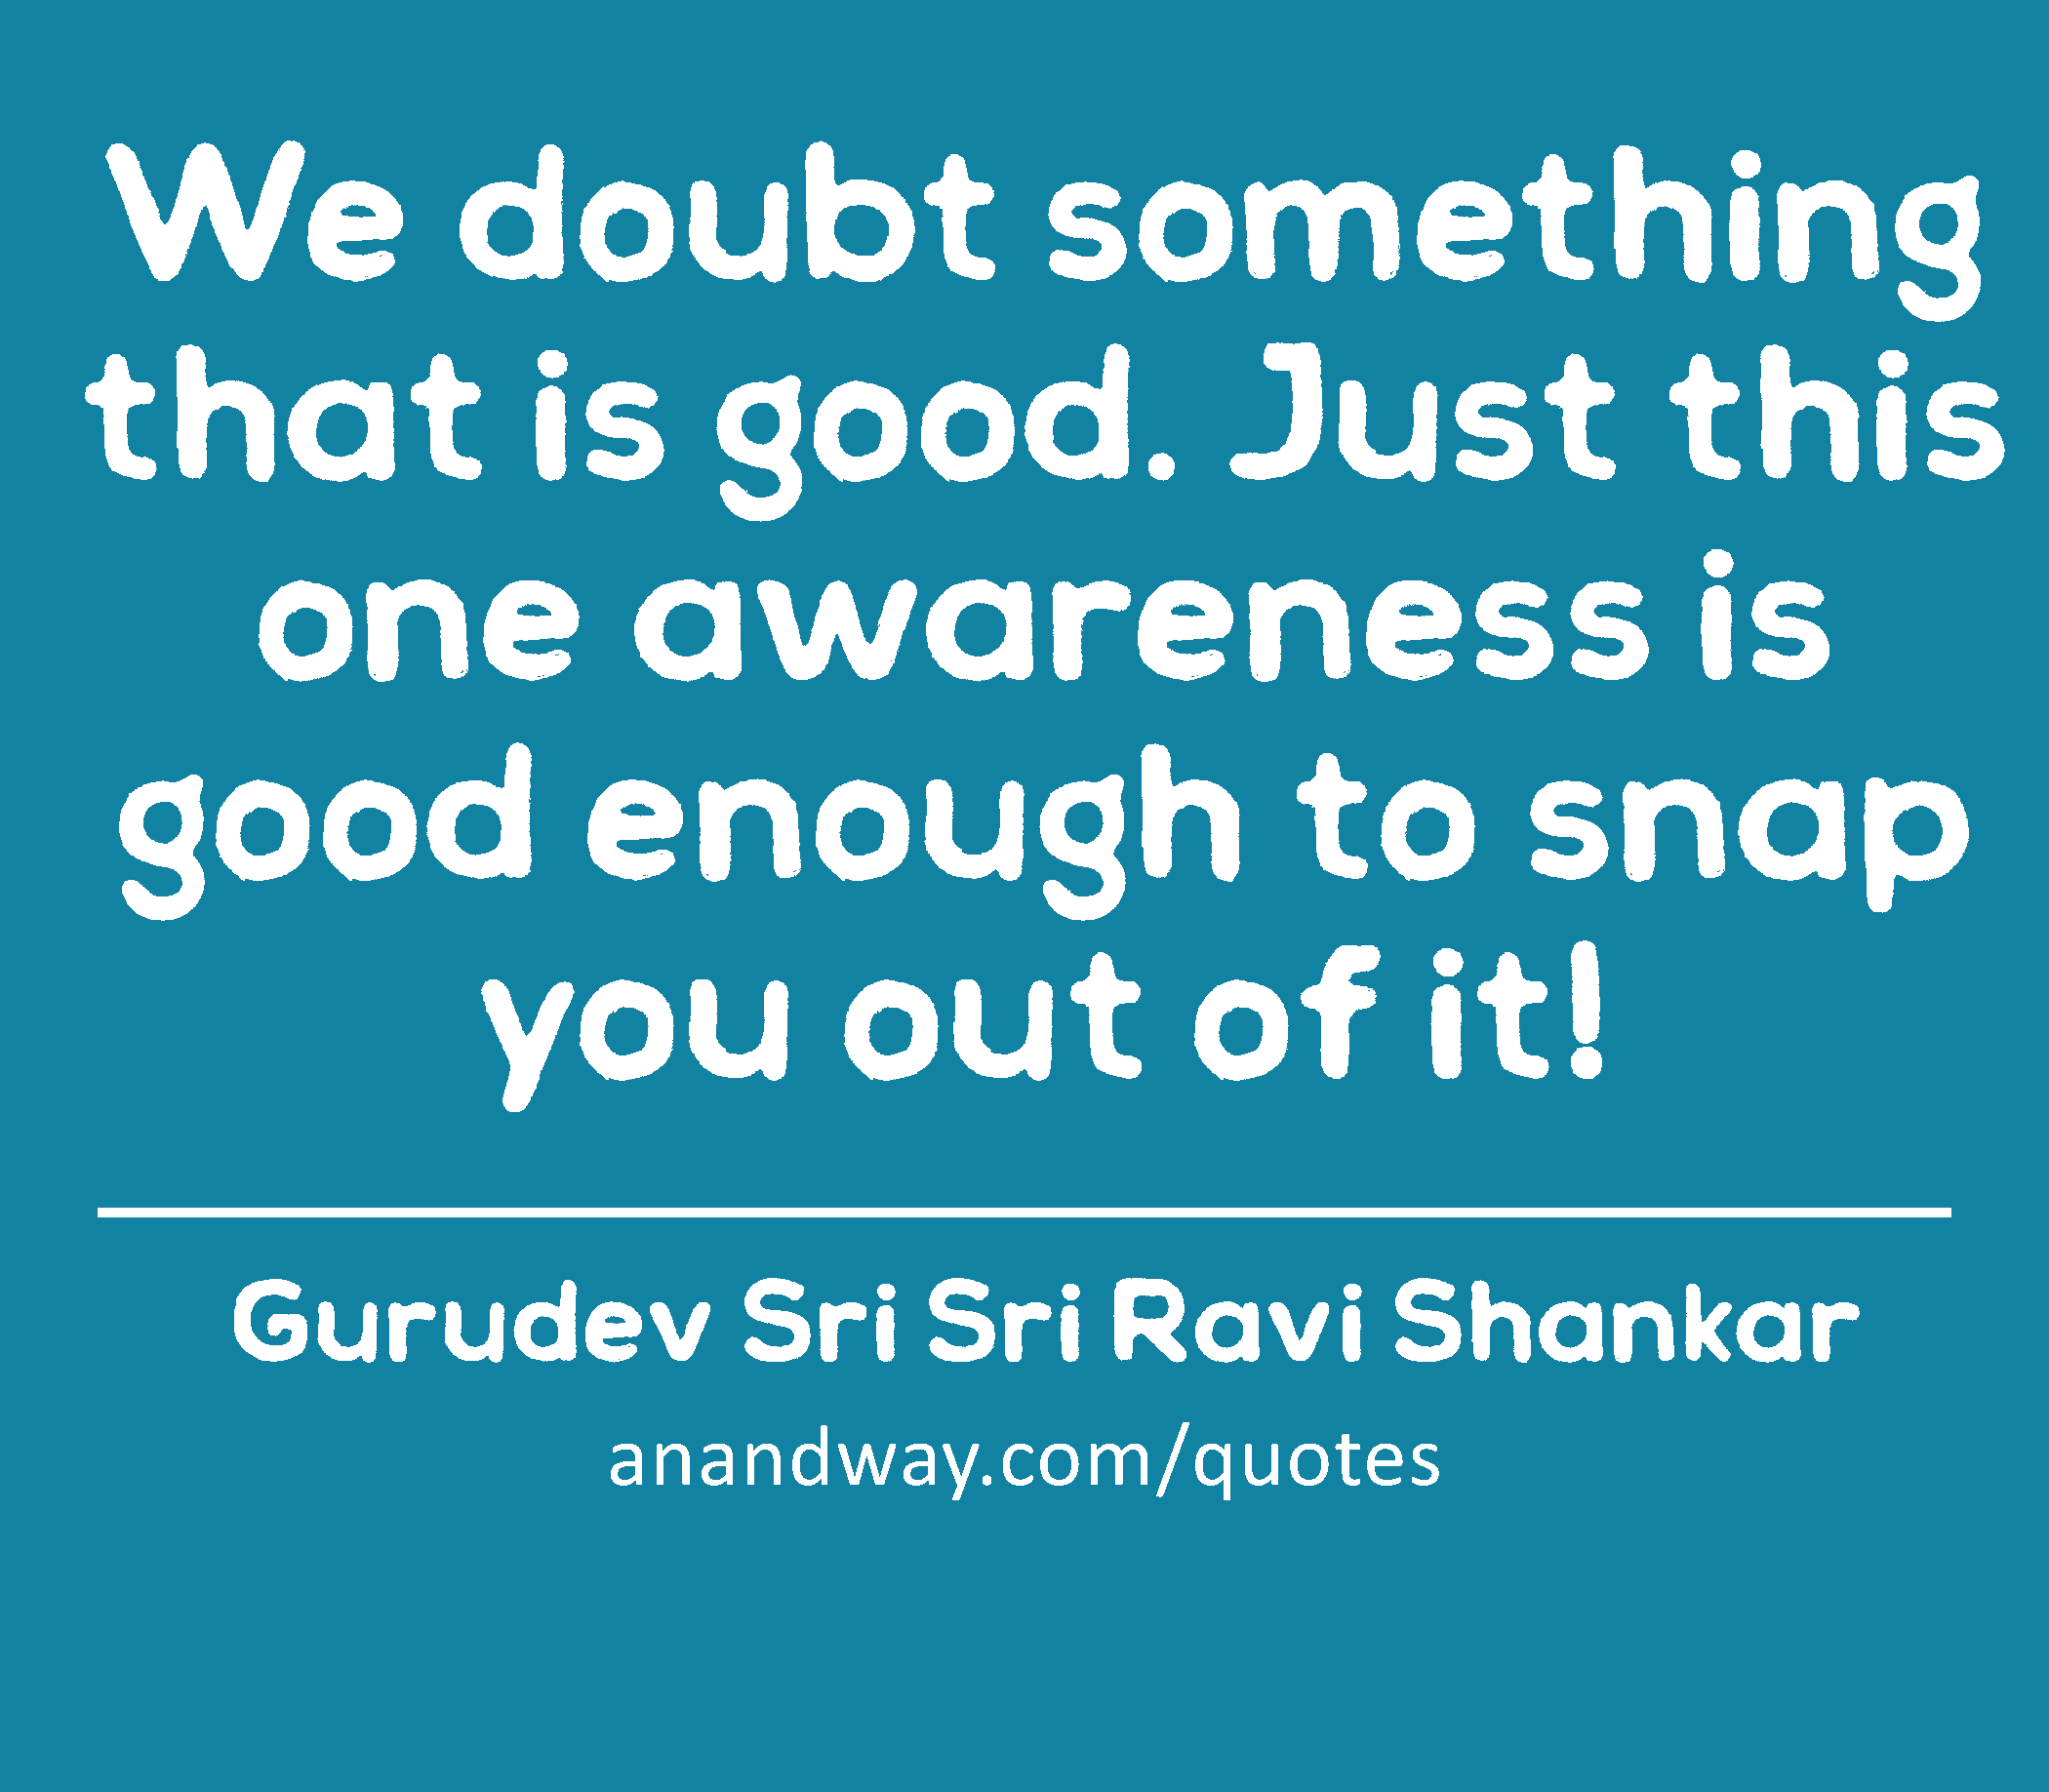 We doubt something that is good. Just this one awareness is good enough to snap you out of it! 
 -Gurudev Sri Sri Ravi Shankar